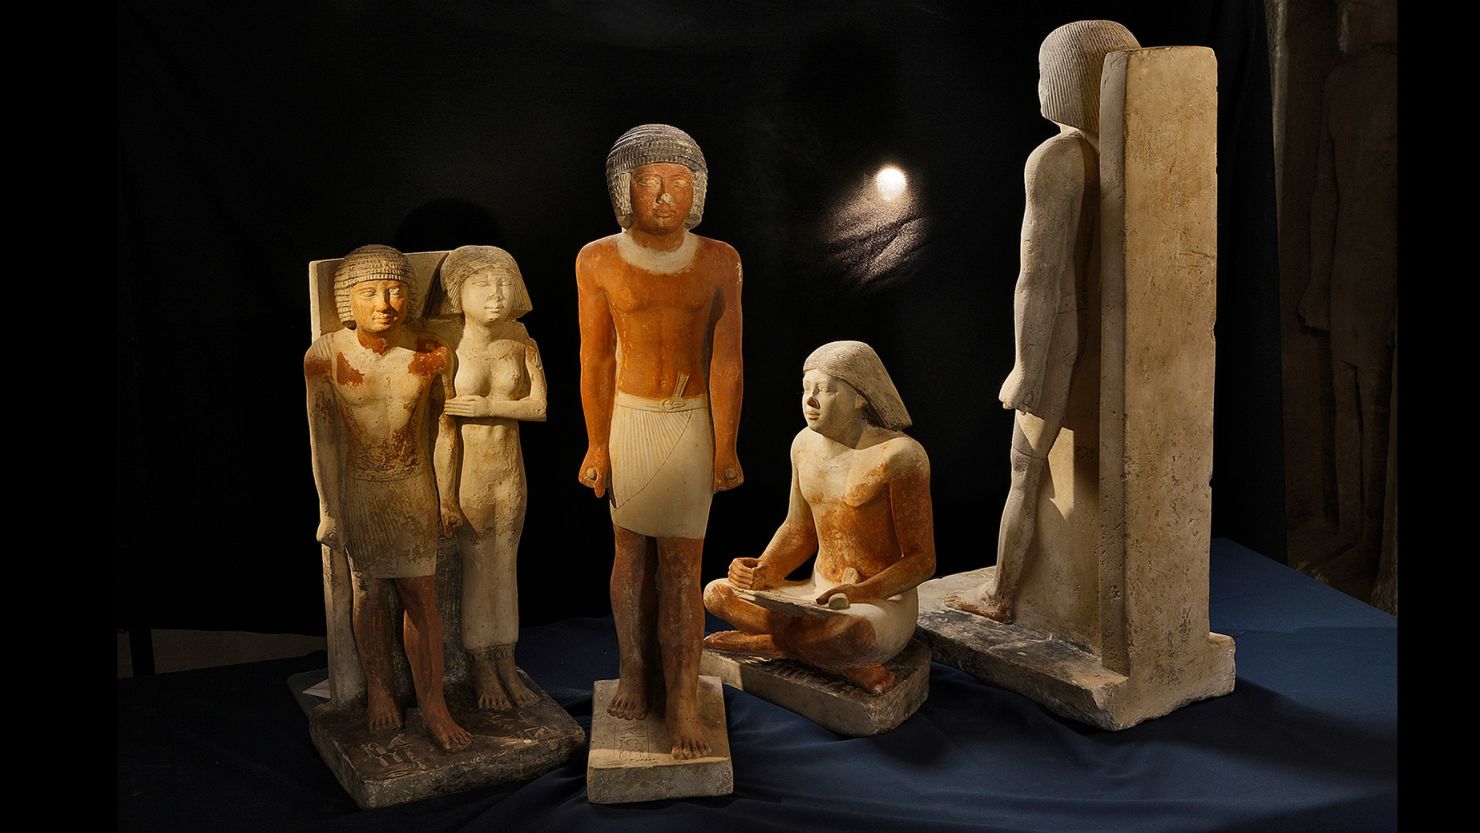 Statues depict the high dignitary and scribe Nefer and his wife in Abusir, Egypt. Scribes were high-status men with the ability to write in ancient Egypt.